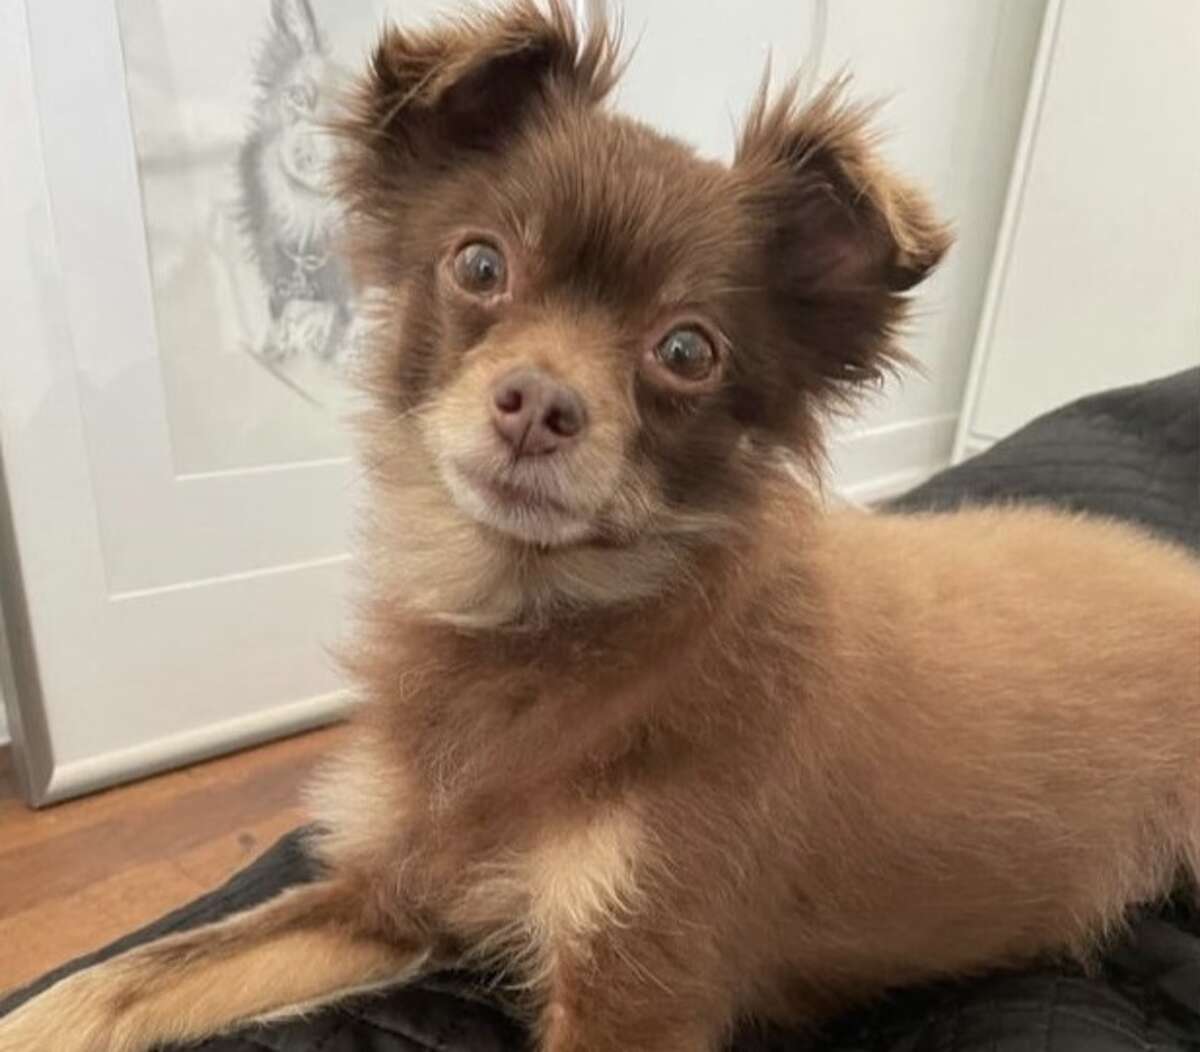 The search for a San Antonio dog is getting a boost from a Texas favorite. Luby's is promising a month of free mac and cheese as a reward for the safe return of Miko, an 8-year-old Pomeranian-Chihuahua mix. 